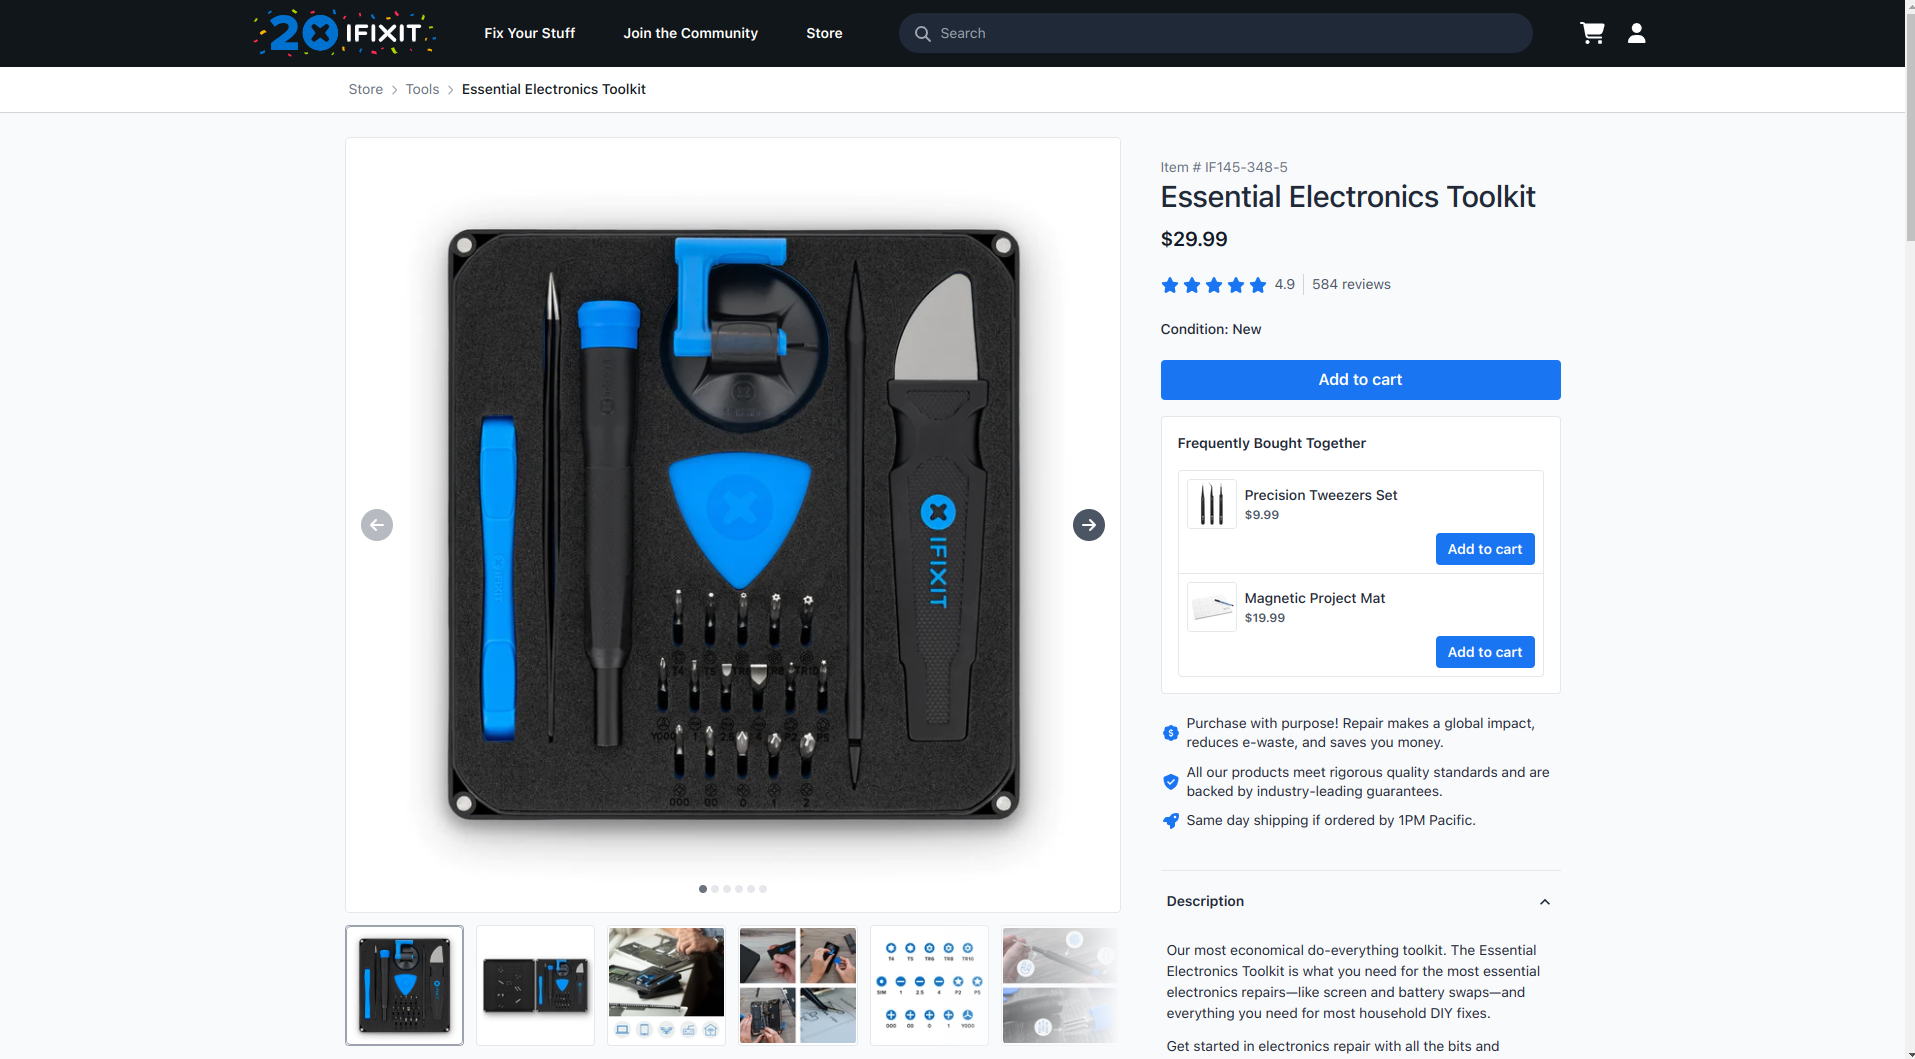 iFixit's product page.